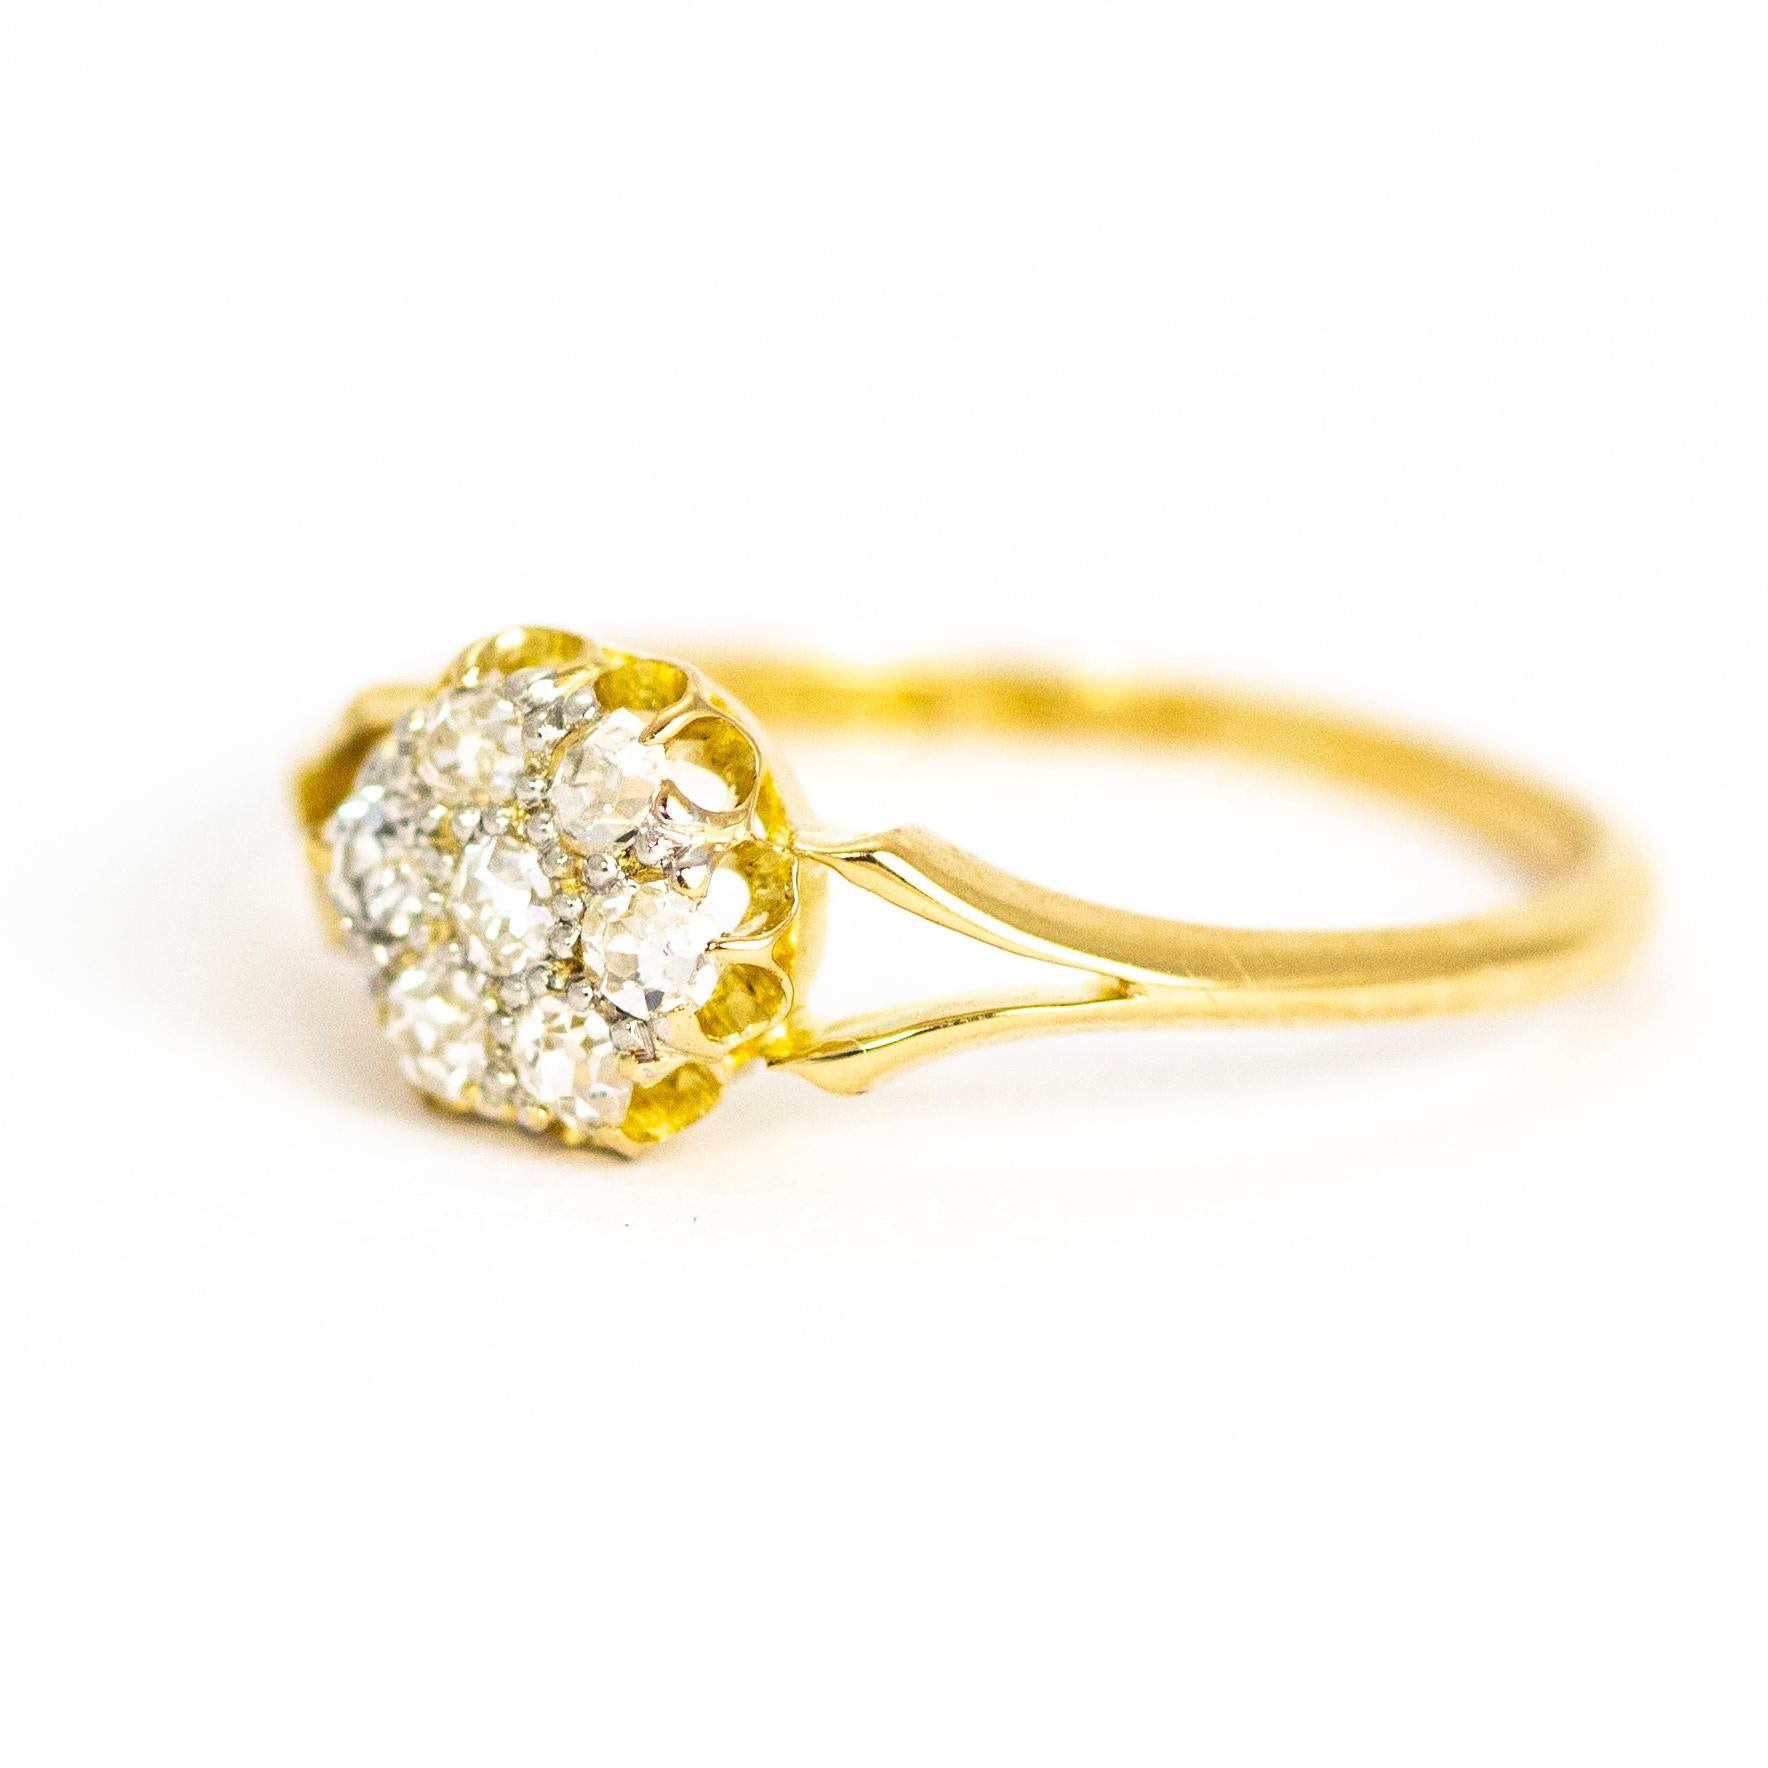 This exquisite antique Edwardian ring is set with a cluster of stunning old European cut white diamonds, between delicate open shoulders. The total diamond weight is approximately 0.35 carats. Modelled in 18 karat yellow gold.

Ring Size: UK M, US 6